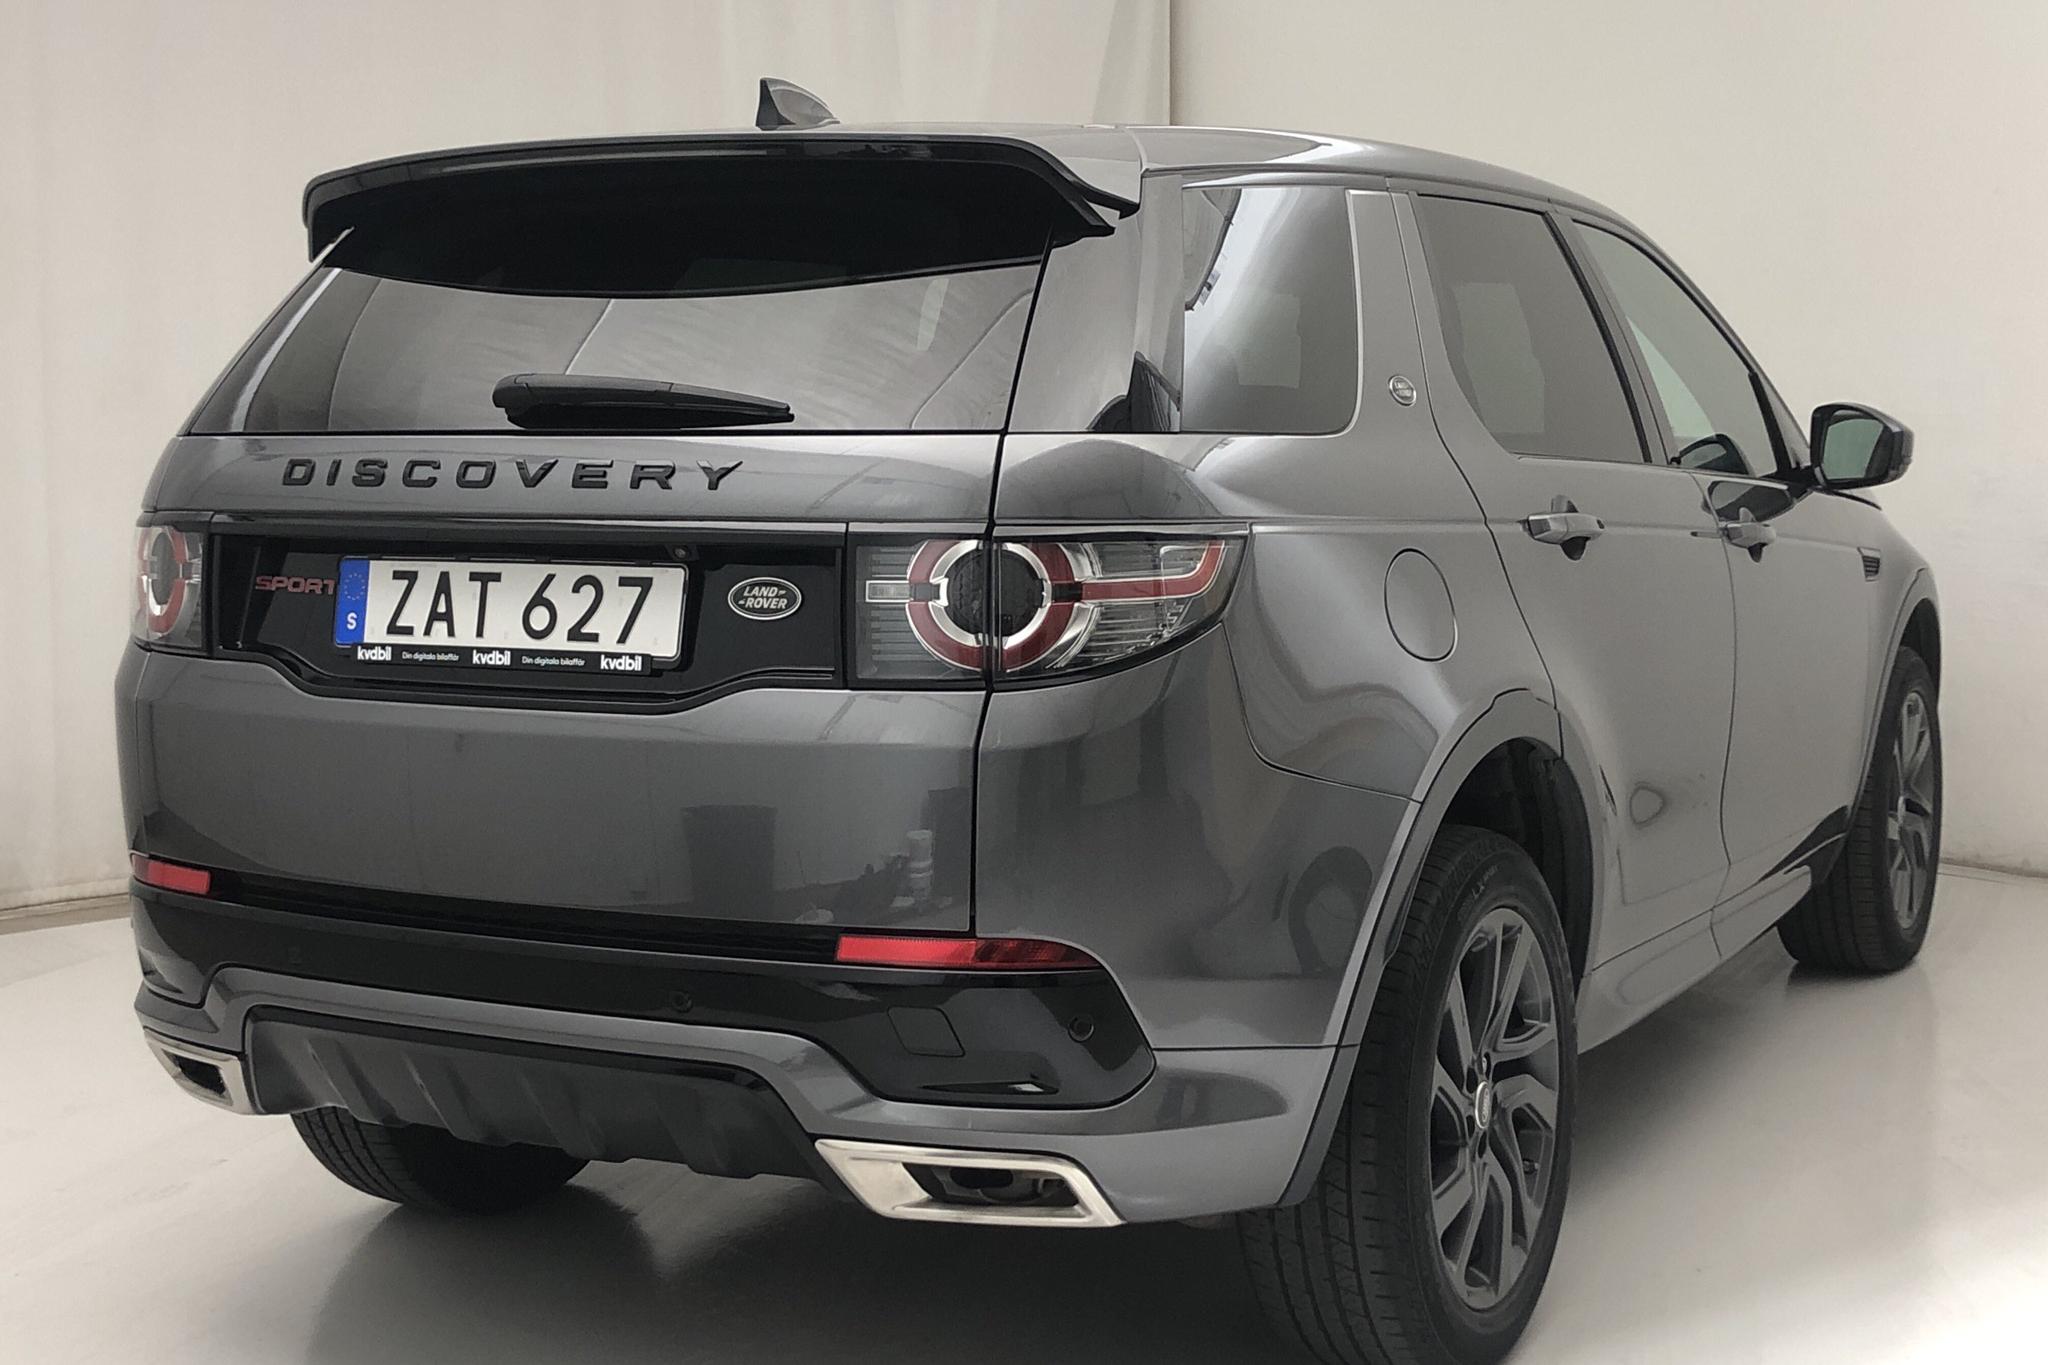 Land Rover Discovery Sport 2.0 TD4 AWD (150hk) - 61 980 km - Automatic - gray - 2018